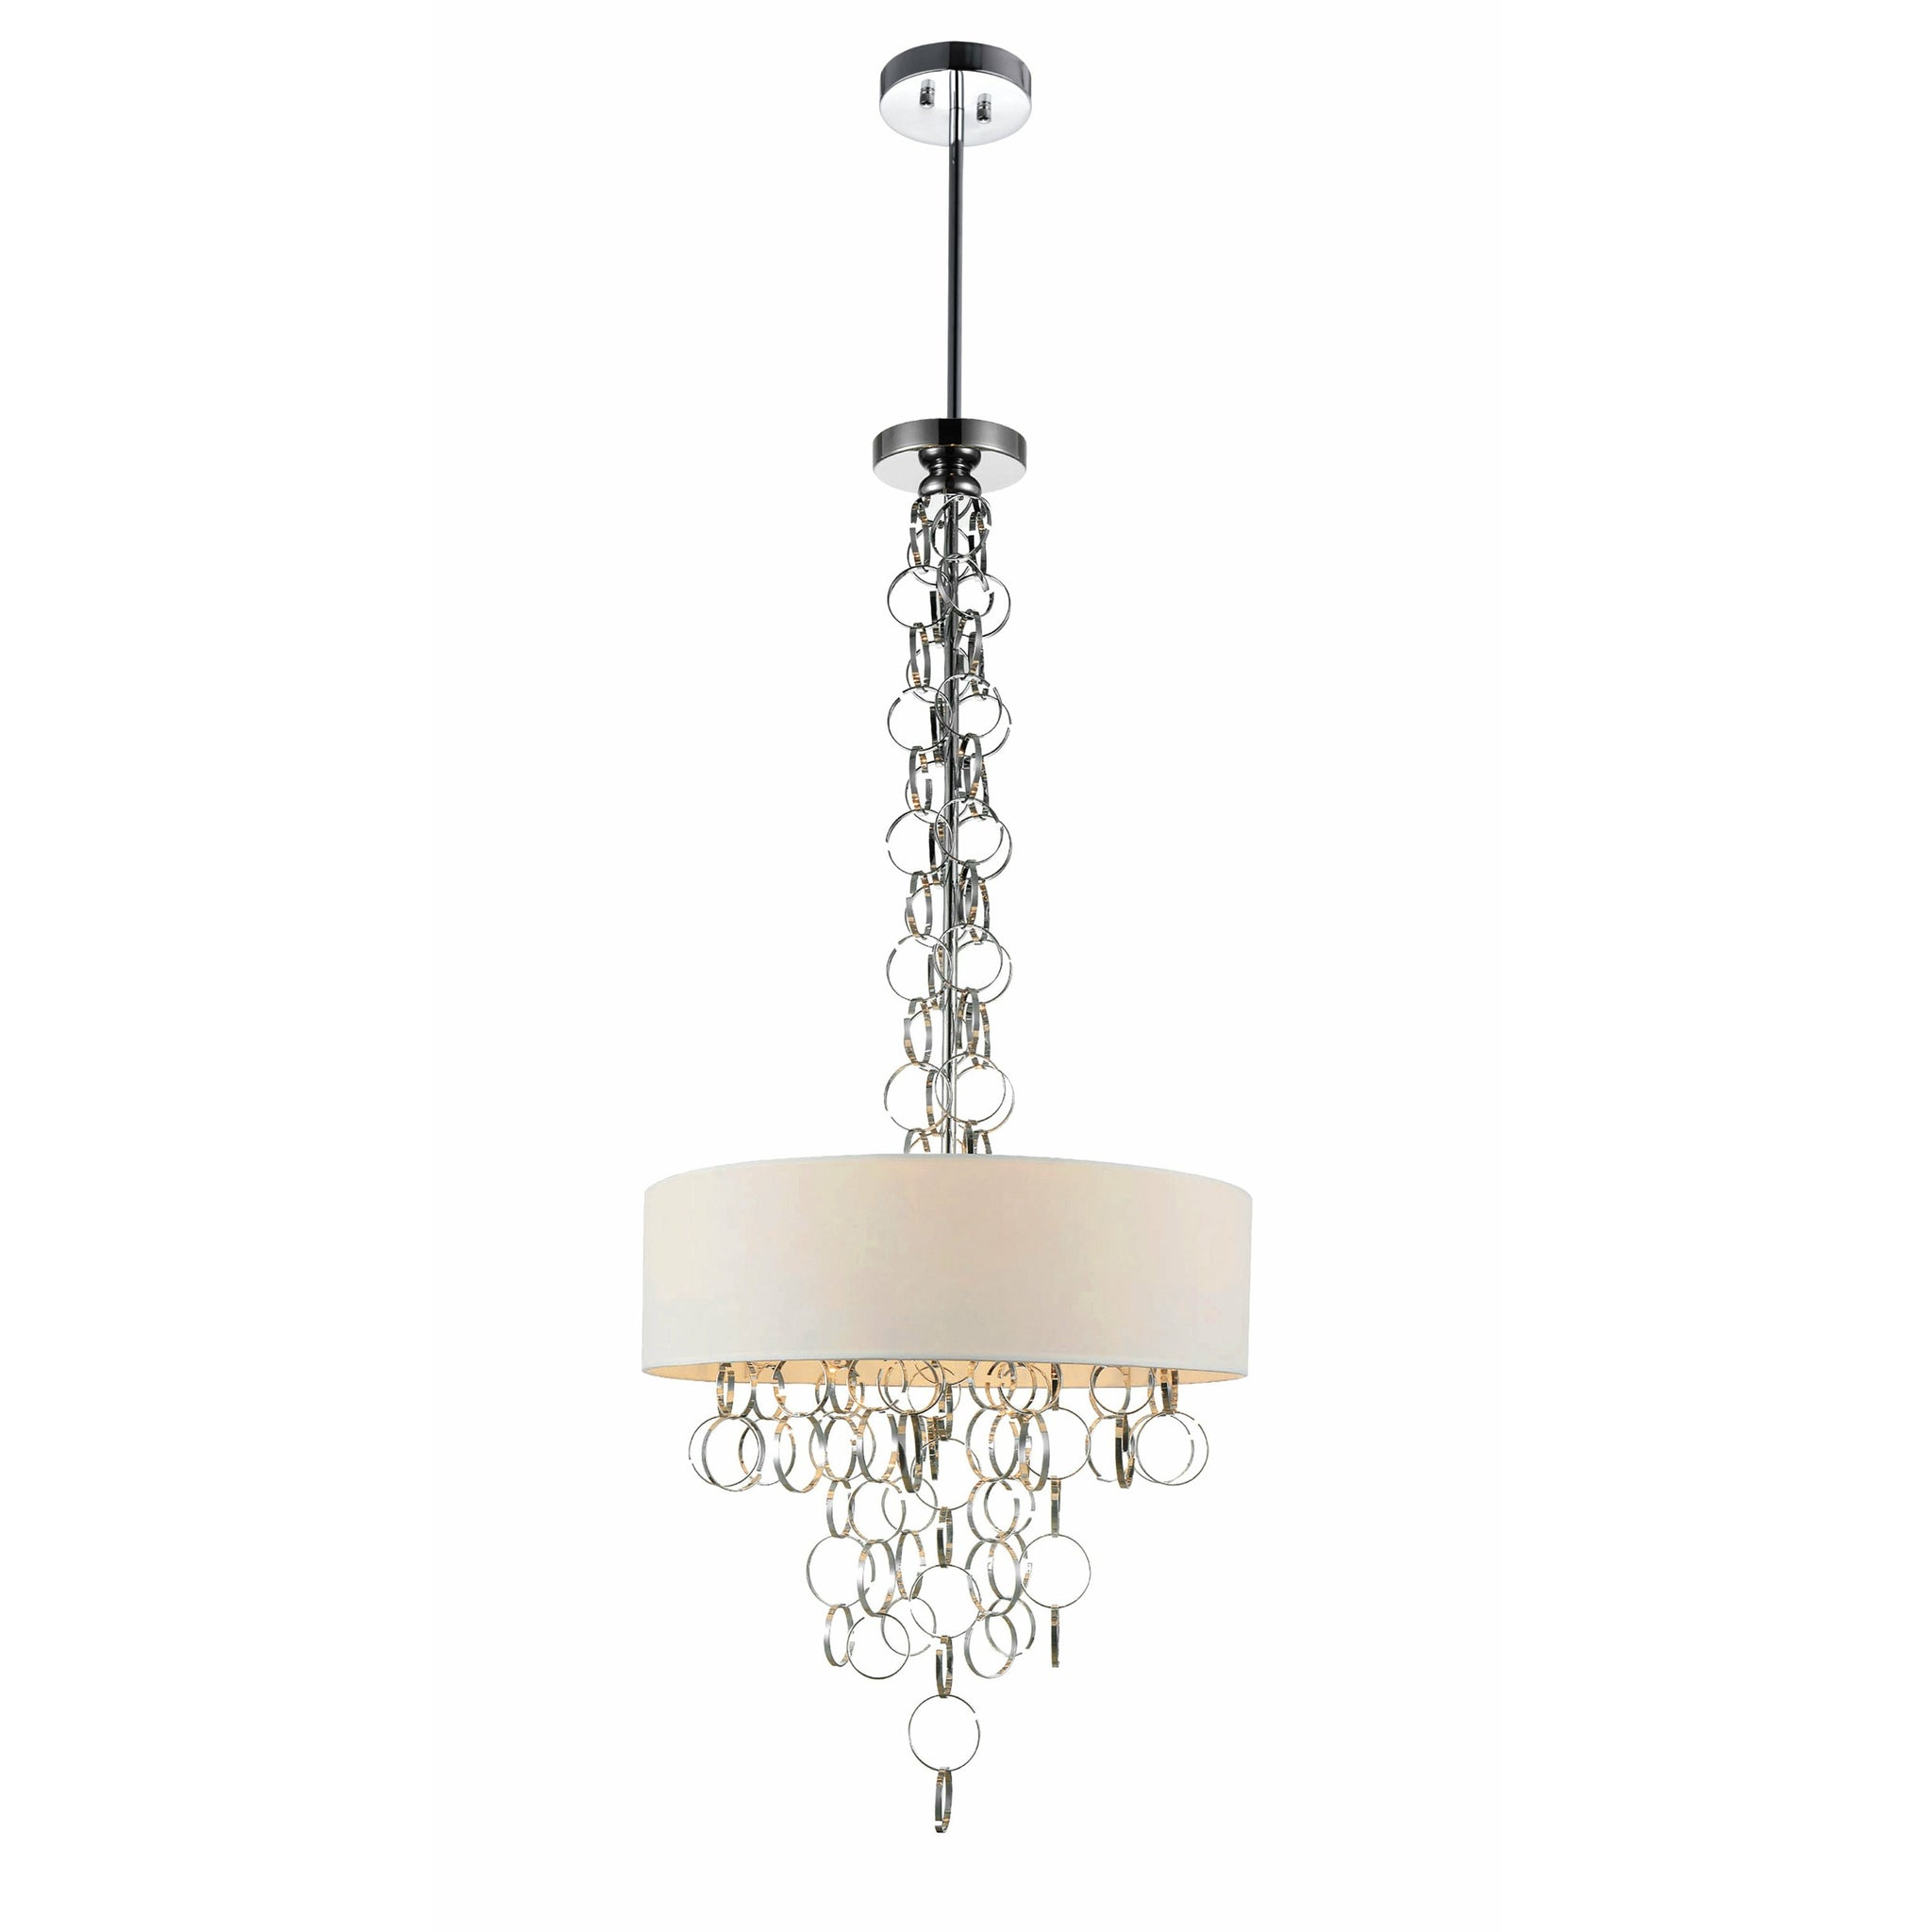 Chained Chandelier Chrome